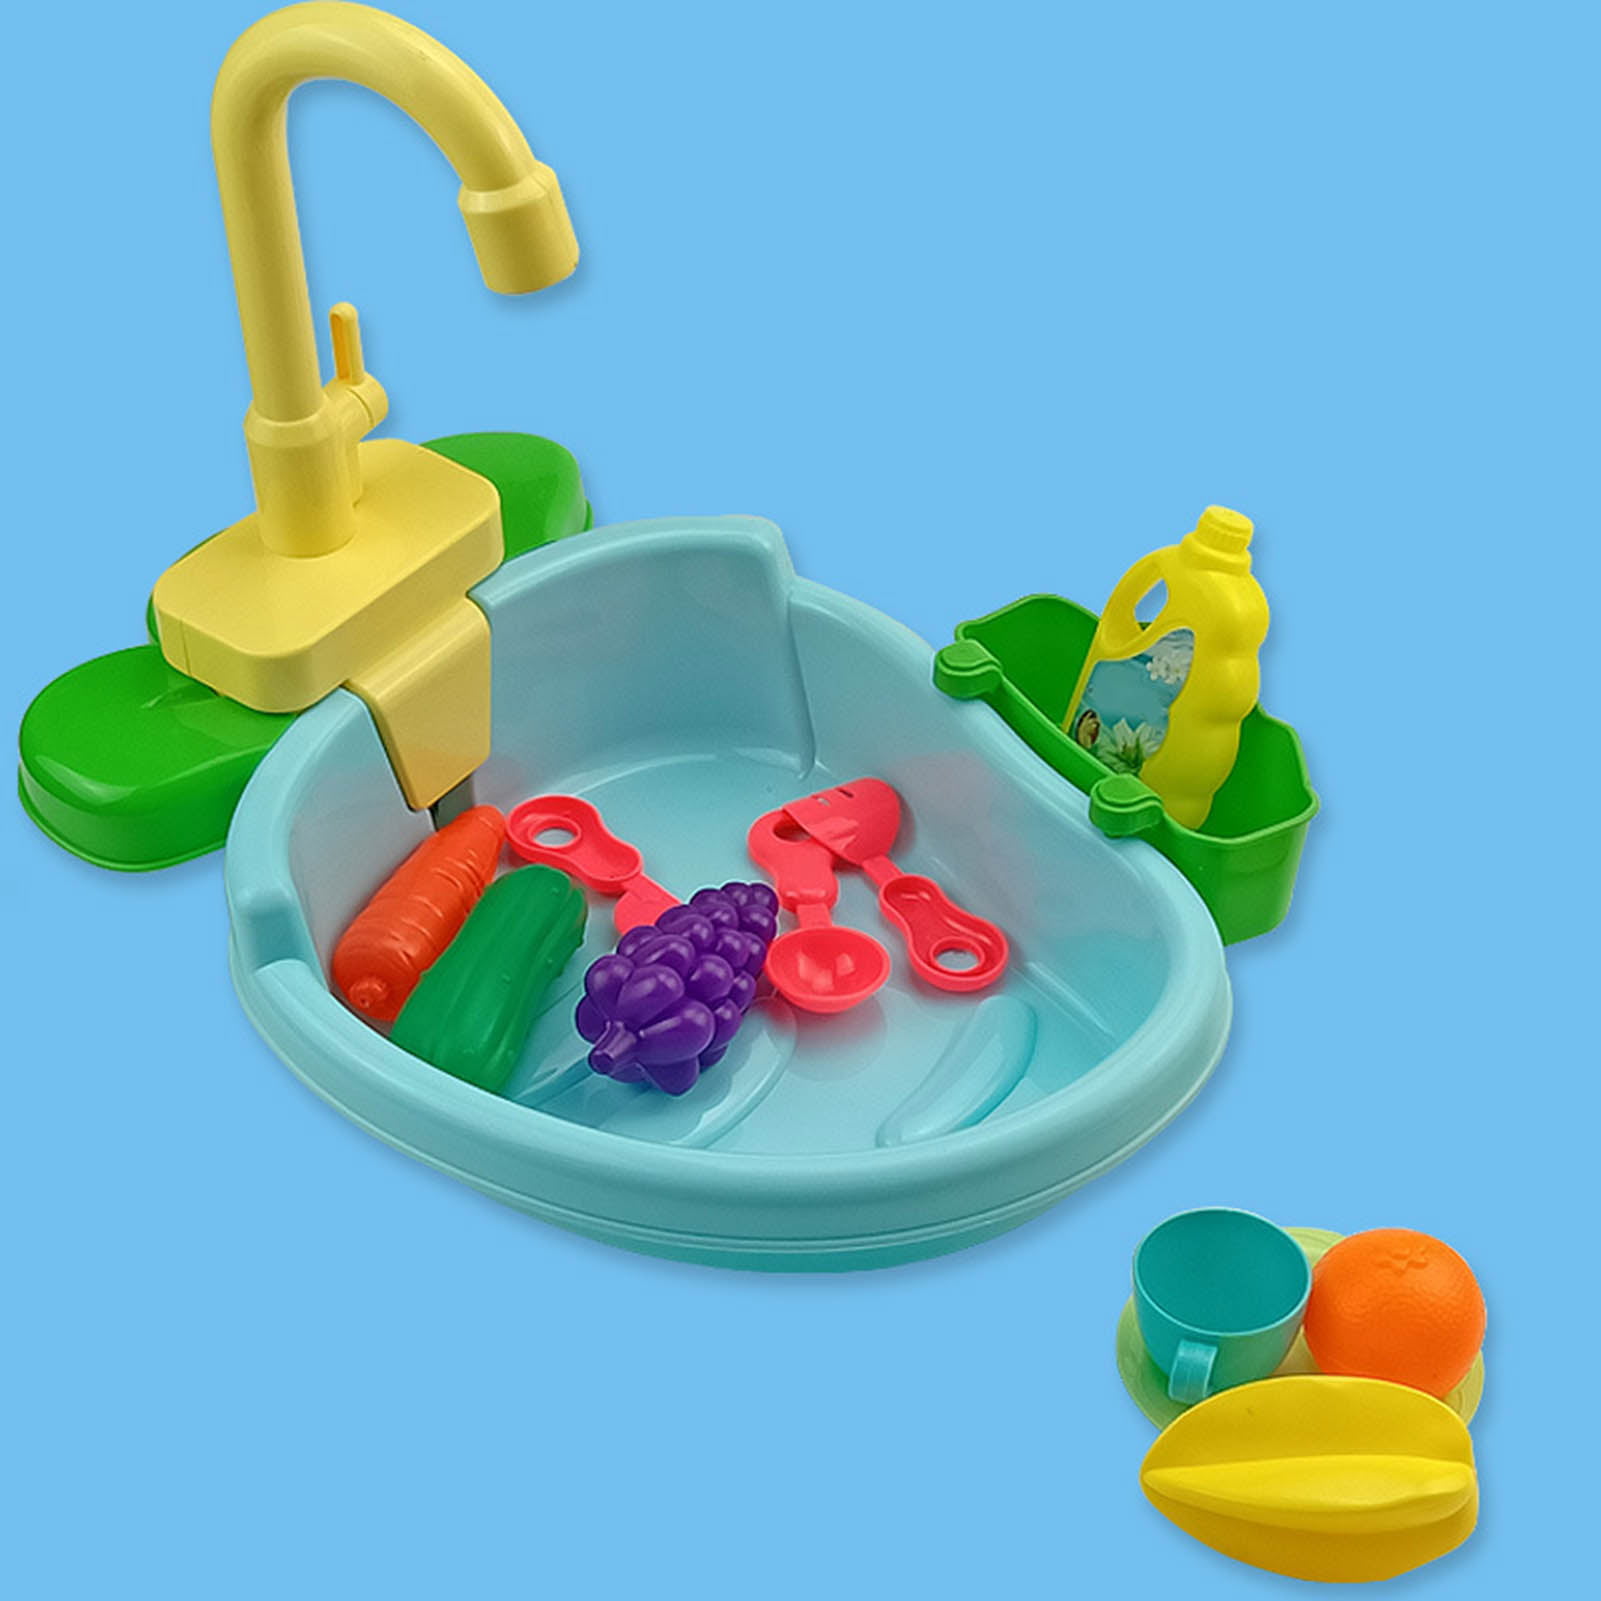 Aofa Kitchen Play Sink Toy - Play Sink - Pretend Play Kitchen Toys for Girls and Boys - Kitchen